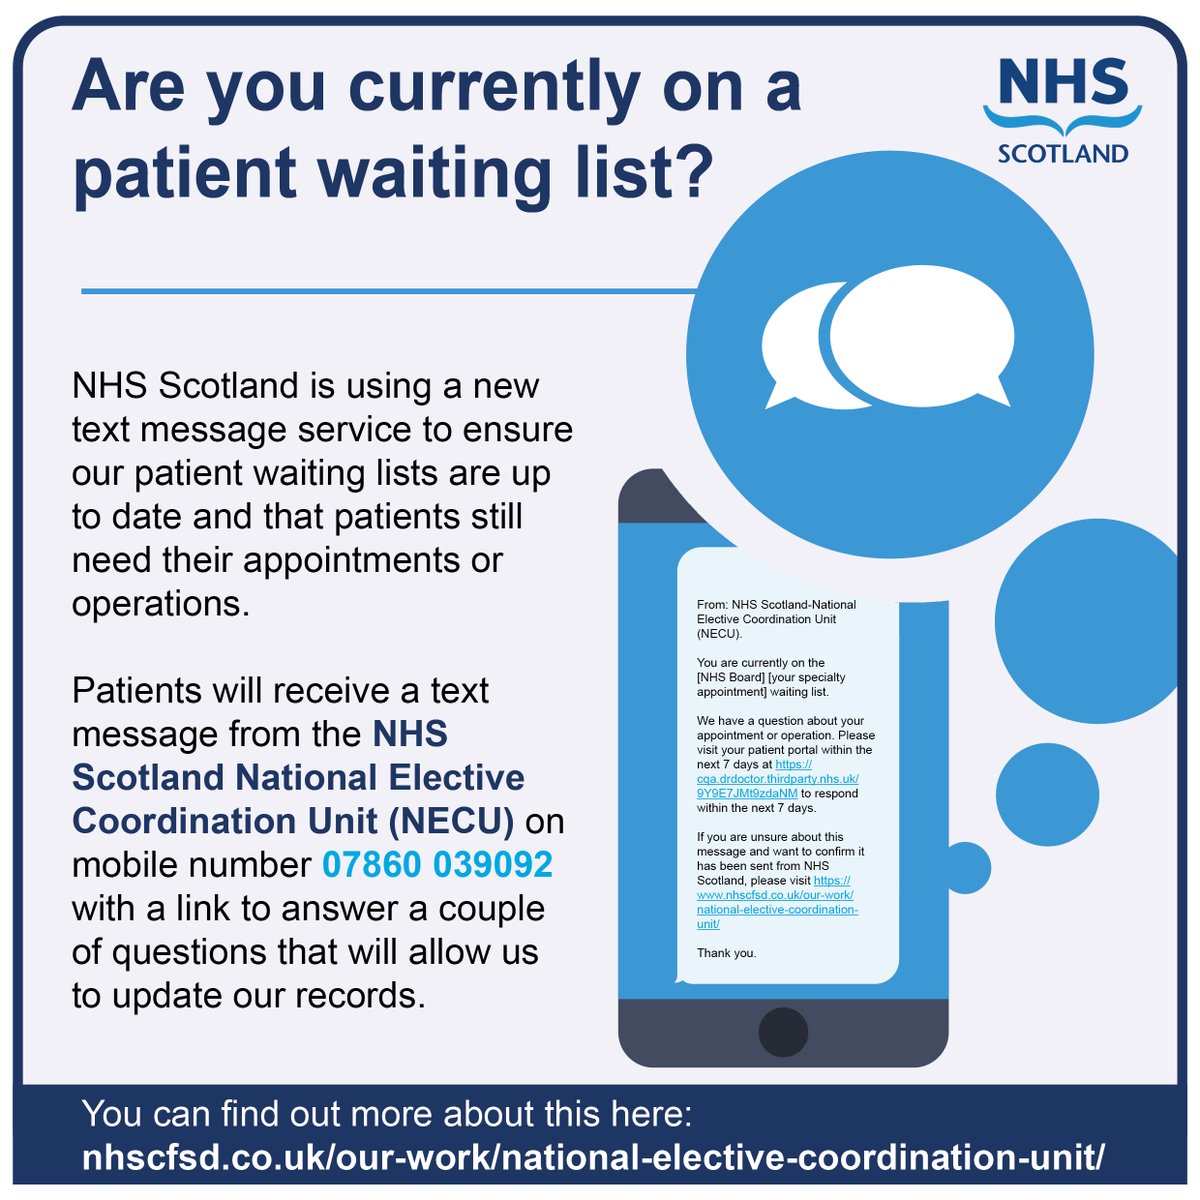 NHS Scotland is using a new service to update our waiting lists. From today @NHSBorders Outpatients will receive a text message from the NHS Scotland National Elective Coordination Unit with a link to answer some questions. Find out more: tinyurl.com/NHSScot-NECU @NHSScotCfSD